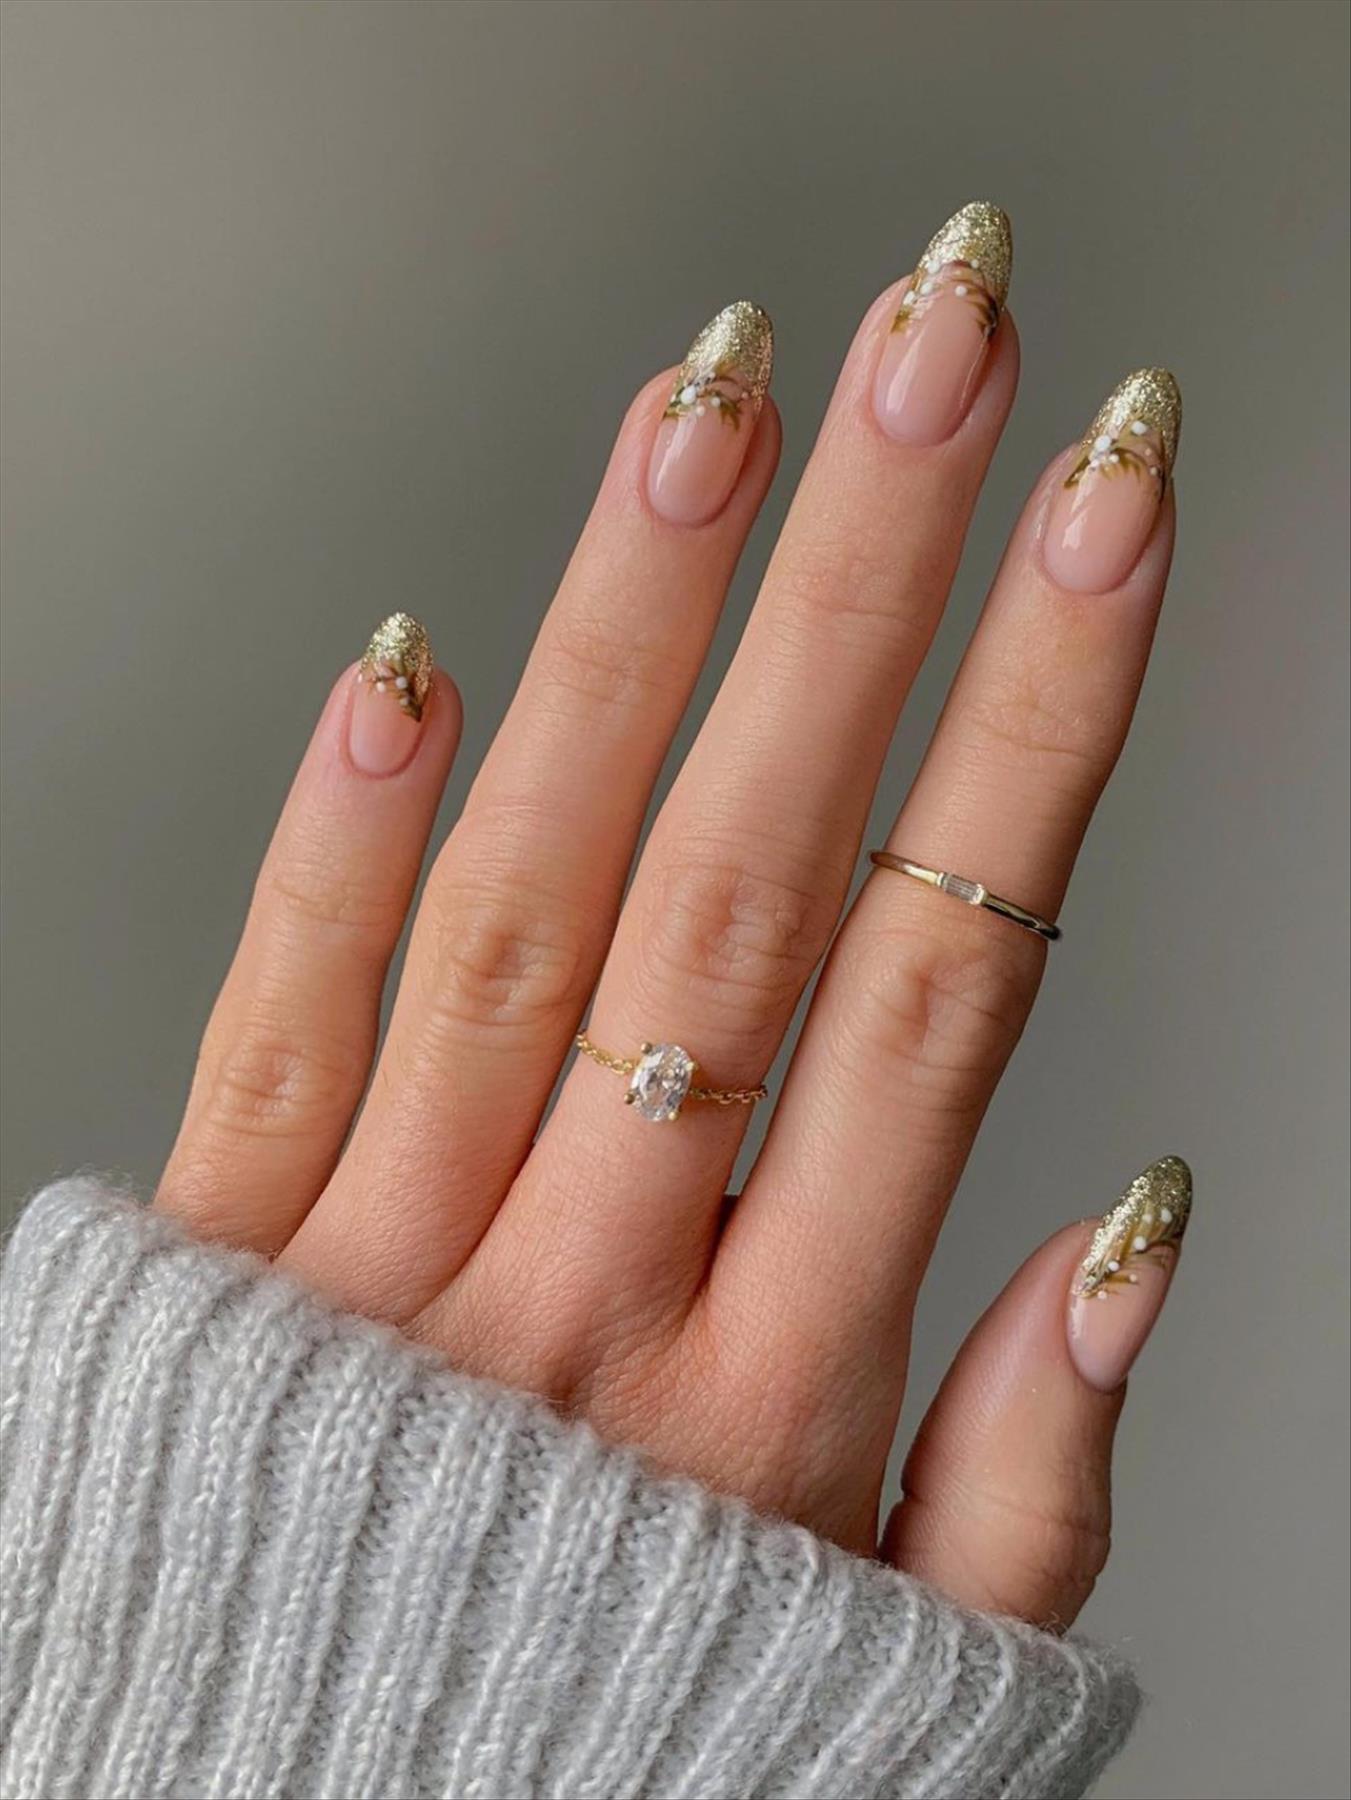 Glitter New Year's nails to Sparkly Start to 2022